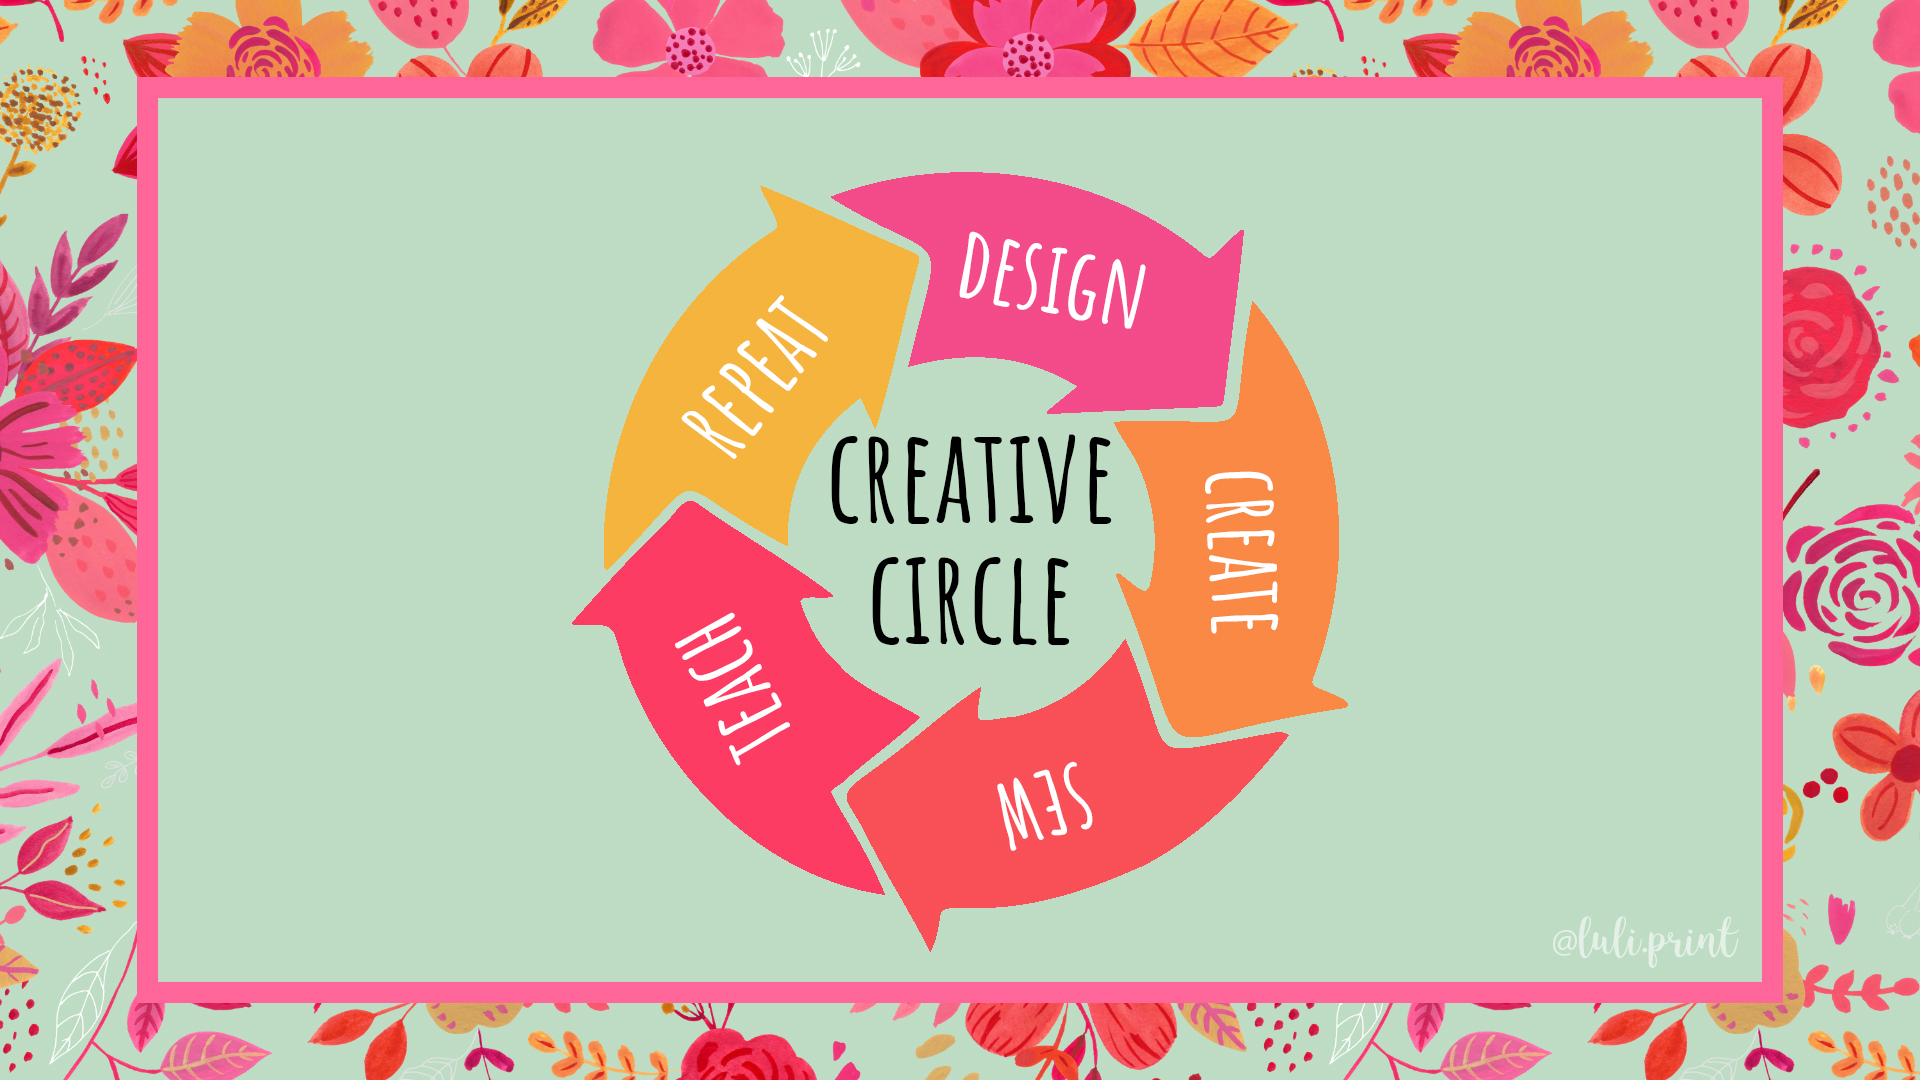 Image of a slide from the webinar with a pink floral border. Inside the floral border in a mint green box, at the center of the image is the word “Creative Circle” in black all caps font. Around the words “Creative Circle” are arrows creating a circle in orange, pink, pinkish red and a warm yellow. There is one word in each arrow in white all caps font. The circle starts with “design,” then moves to “create,” then “sew,” then “teach,” then “repeat,” which leads back to “design.”